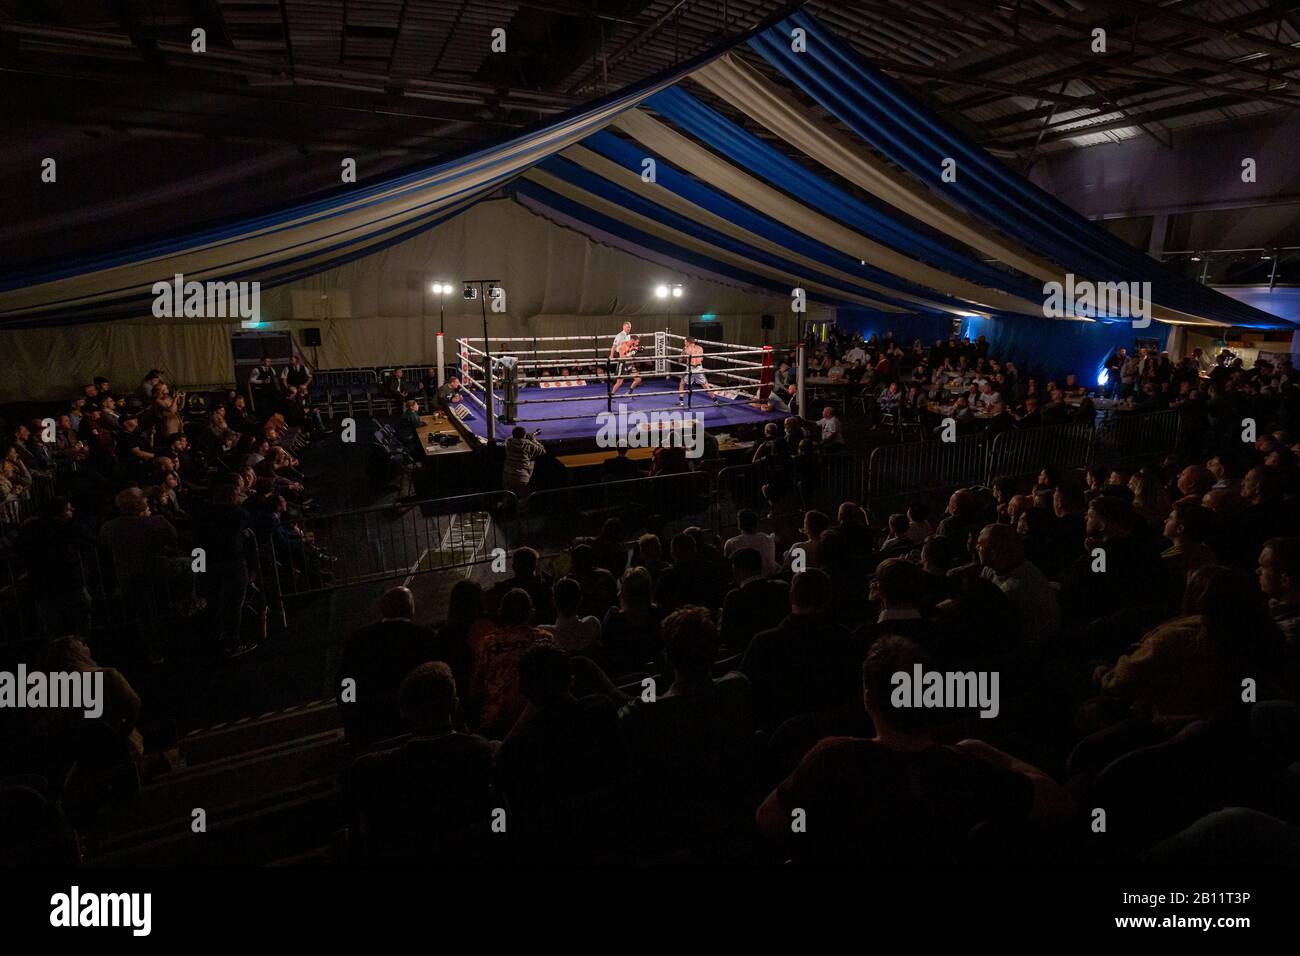 TAUNTON, UNITED KINGDOM. 21 Feb 2020. Yeovil boxer Dean Dodge (black trunks) fought Birmingham boxer and former English Champion & WBC International Super Bantamweight Champion Sean Davis (white trunks) at the Wellsprings Leisure Centre in Taunton, hosted by Priority Boxing Promotions. He fought hard to get a knock-out from the start but due to damaging his right hand in the second round he was hindered but won on points after 6 three-minute rounds. This makes Dodge, nicknamed El Diablo, undefeated in 10 professional fights and confident of a title shot in the near future. Stock Photo